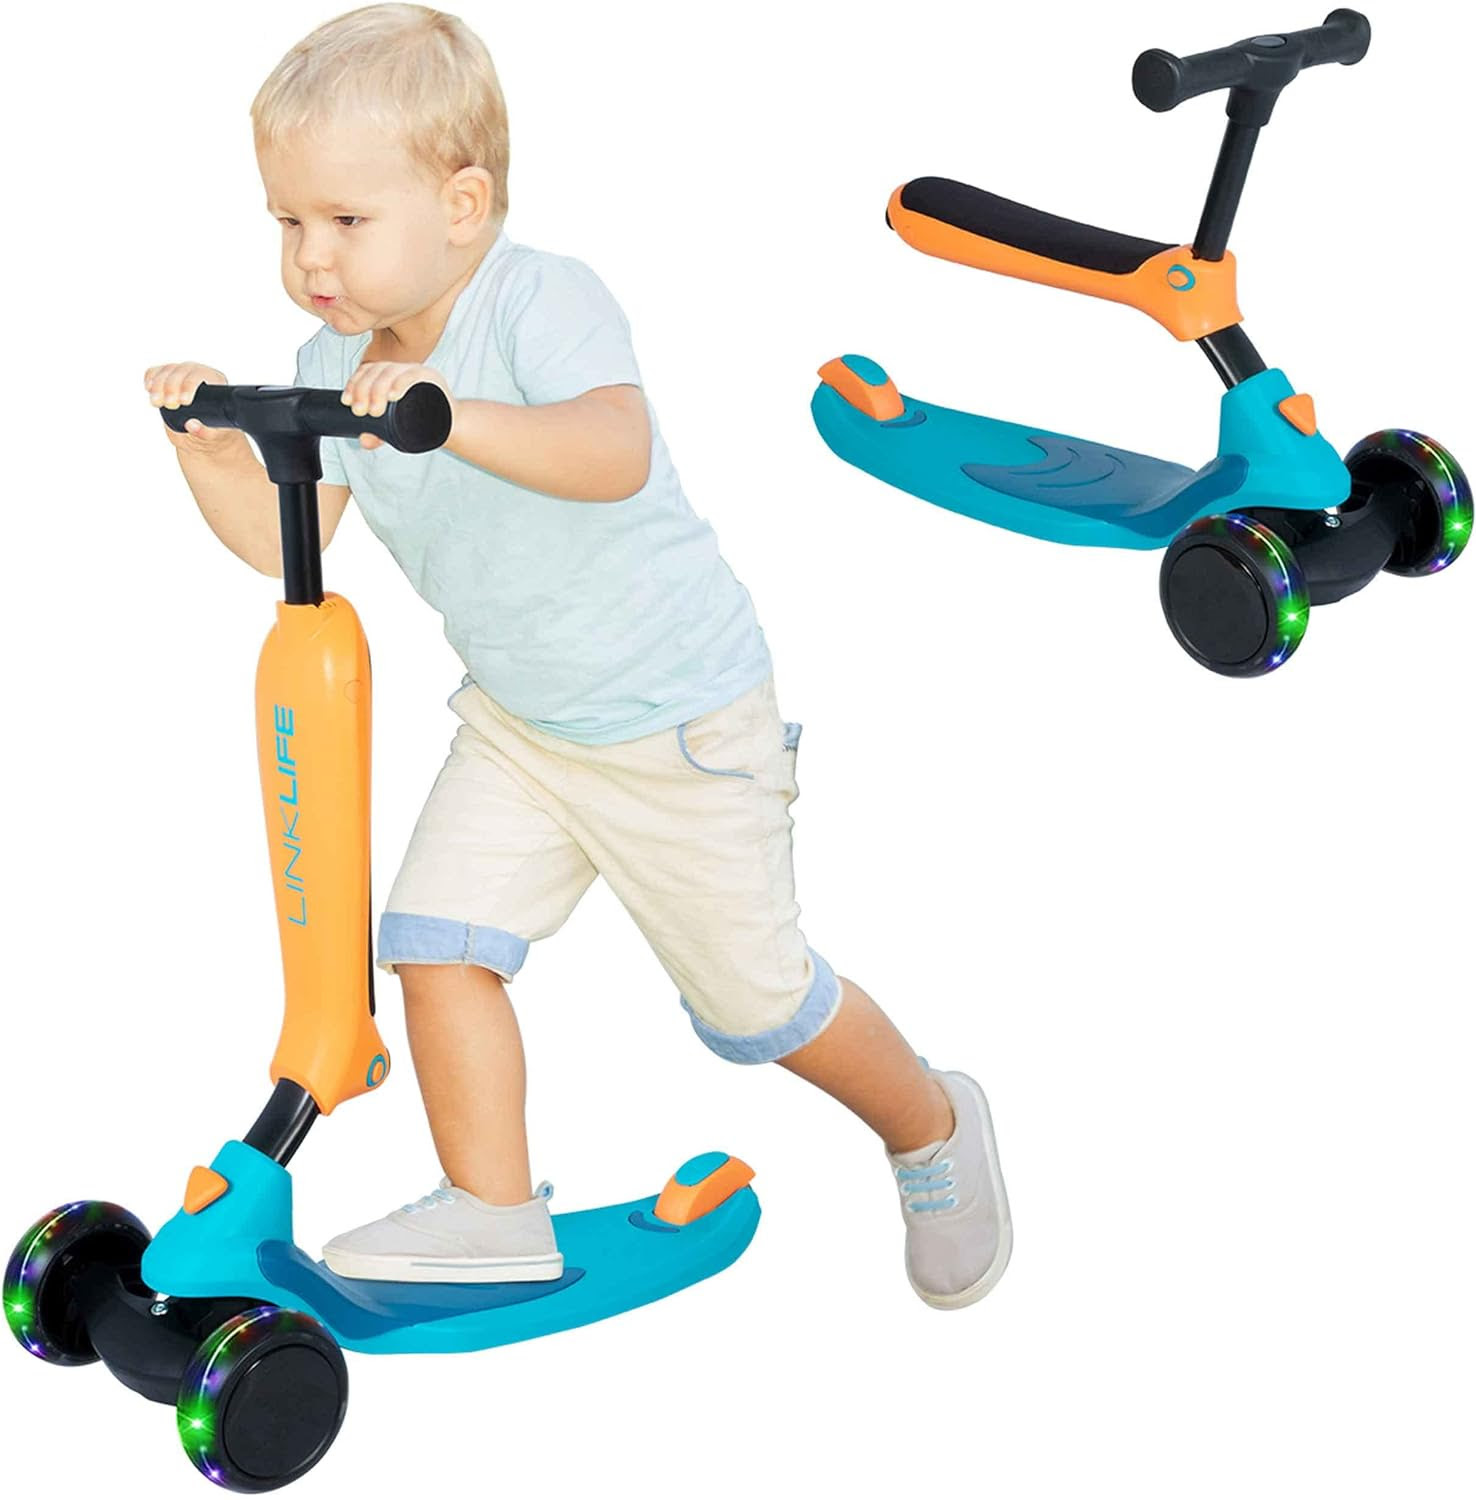 2 in 1 Toddler Scooter. 1189 units. EXW Los Angeles $17.00 unit.